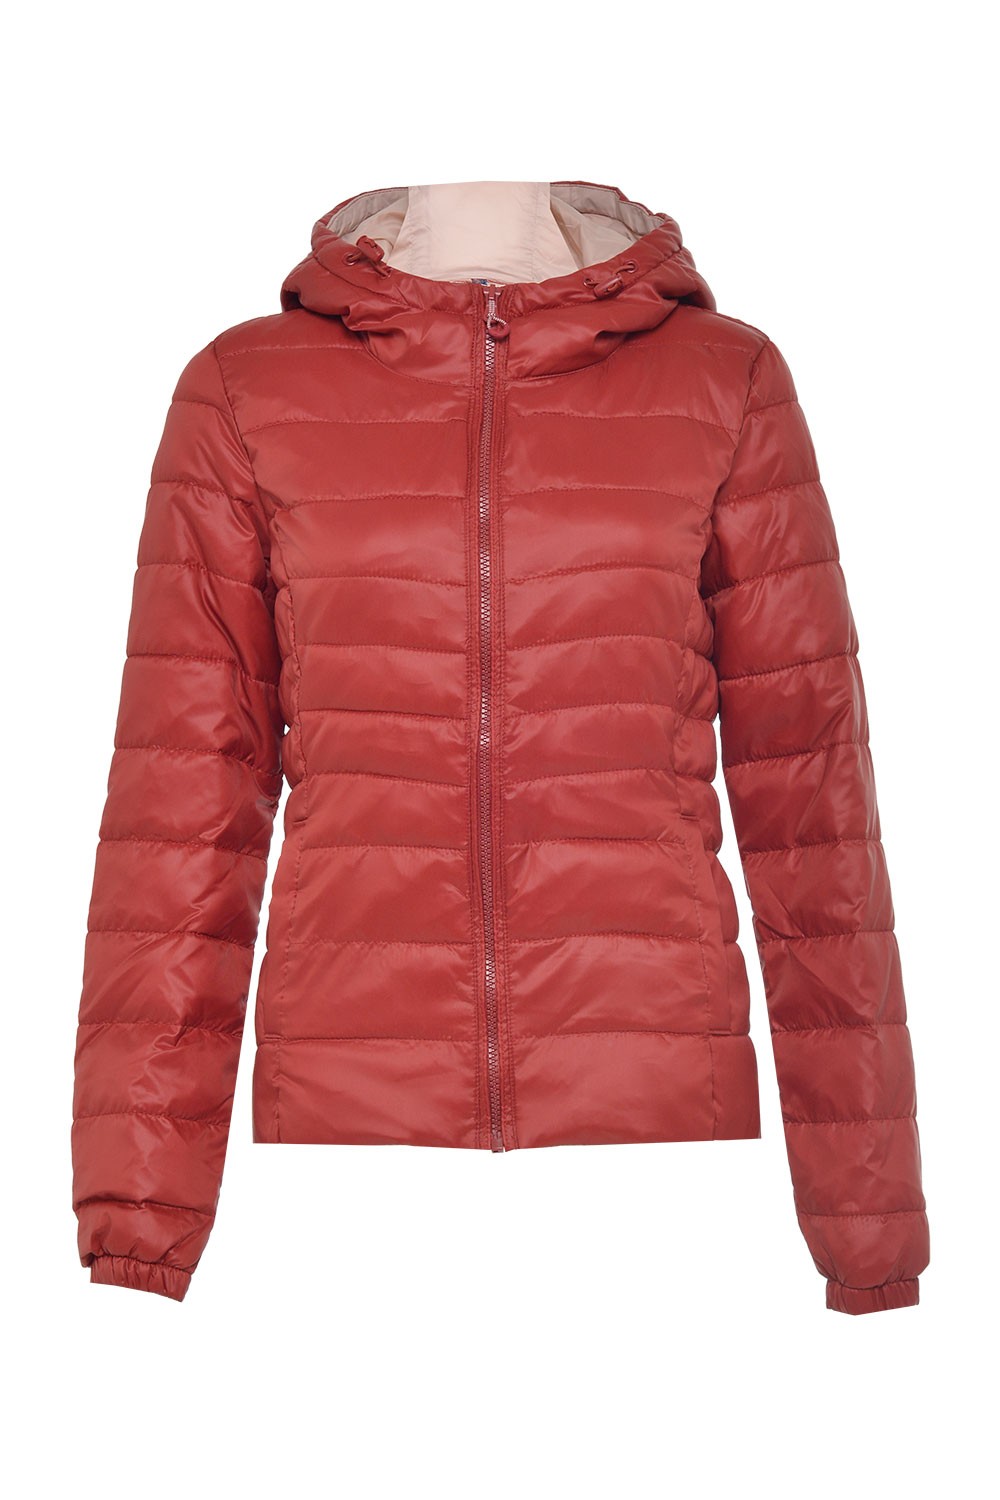 Only Tahoe Hooded Quilted Jacket in Red | iCLOTHING